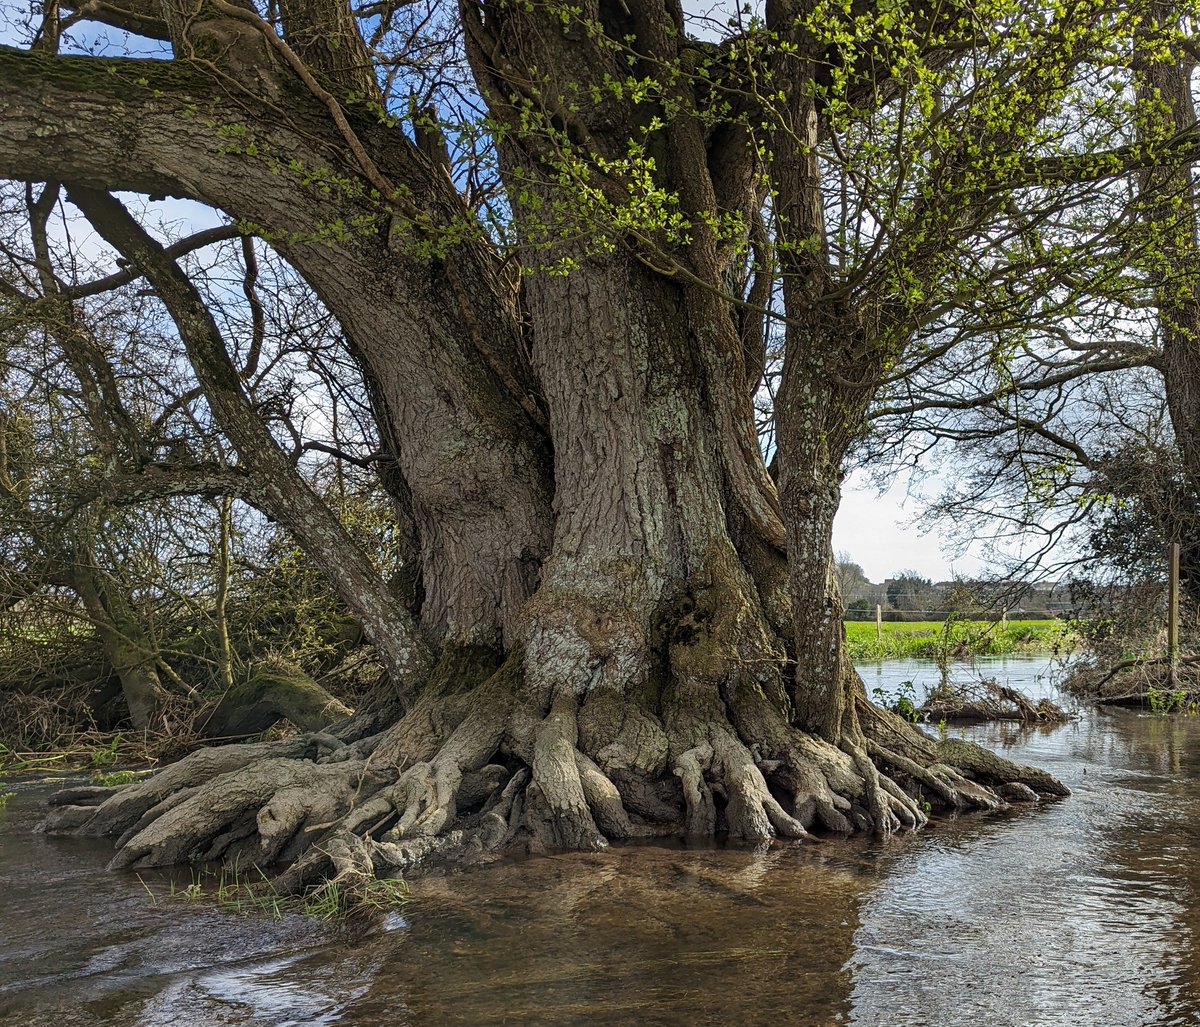 Midstream Alder for this week's #thicktrunktuesday. Multi-stem by nature or possibly coppice, roots exposed by flood and sheltering livestock, still stands sentinel where it first started. Valued by Otter who spraints on the lowest branch. 📷 Stinsford & the Dorset Frome